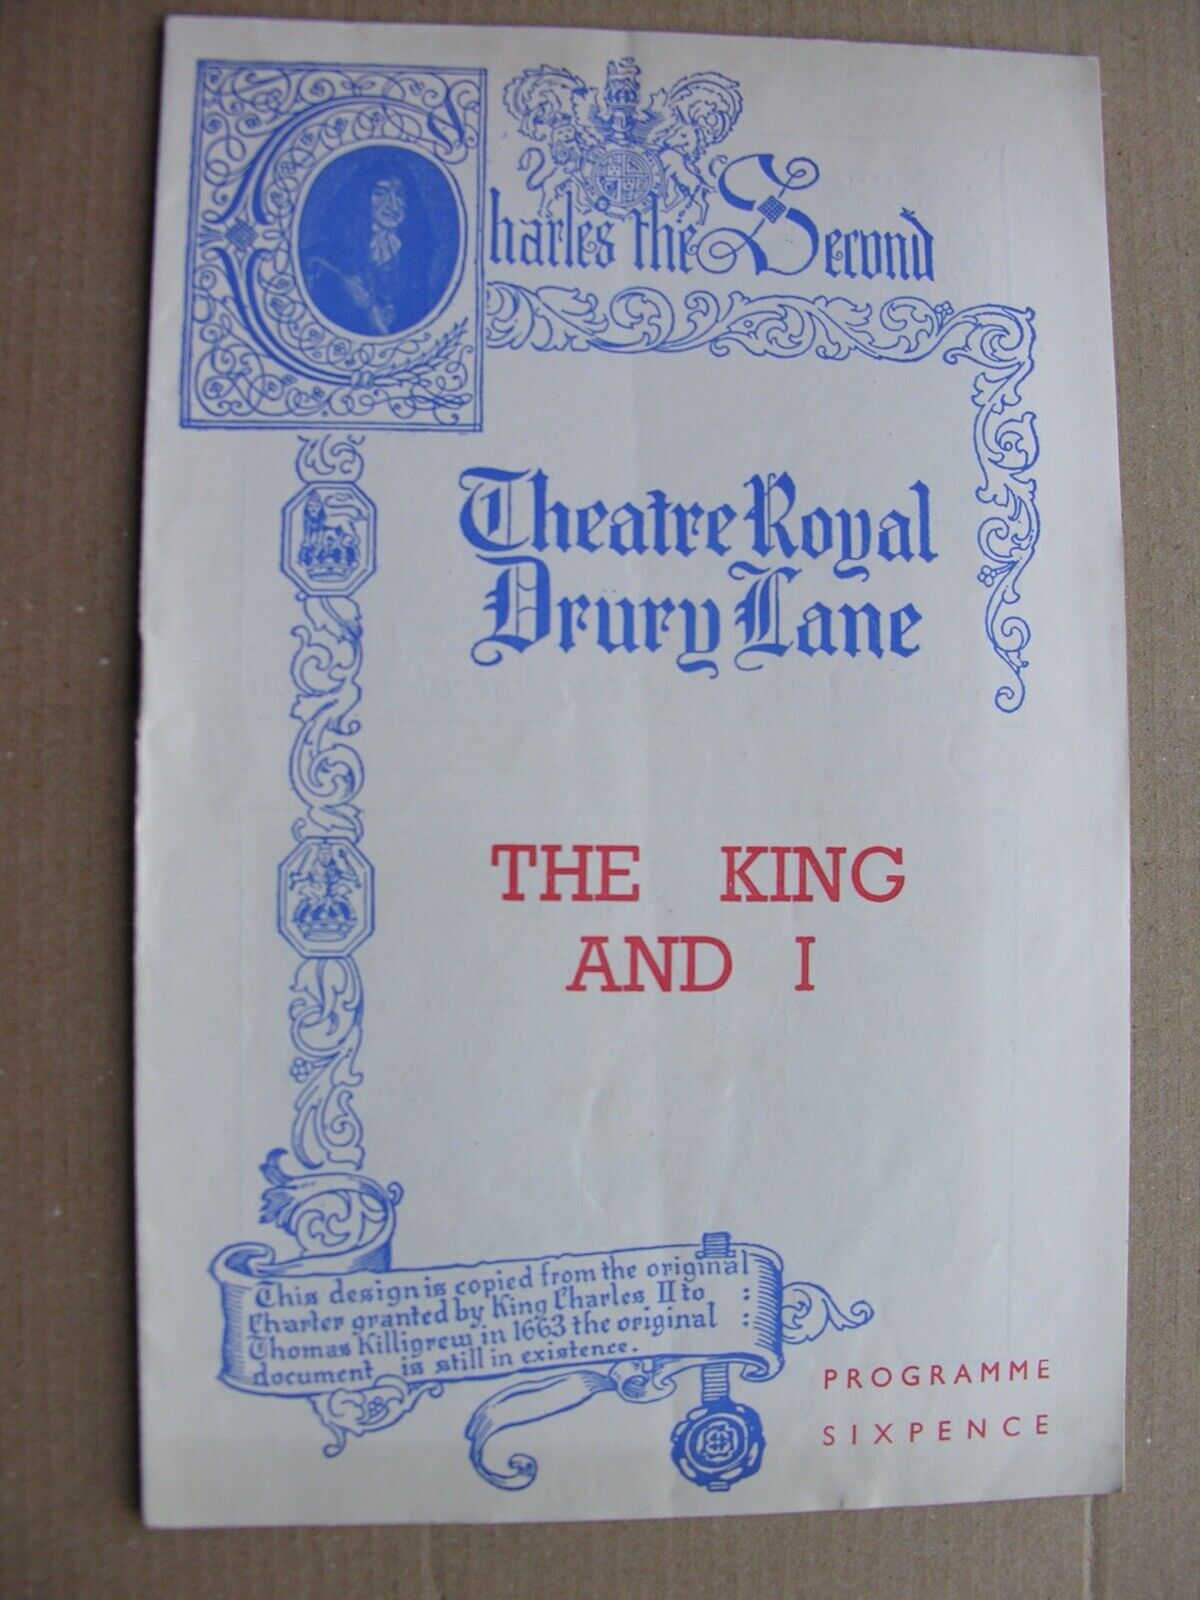 1955 THE KING AND I Eve Lister, George Pastell, Muriel Smith, Martin Benson